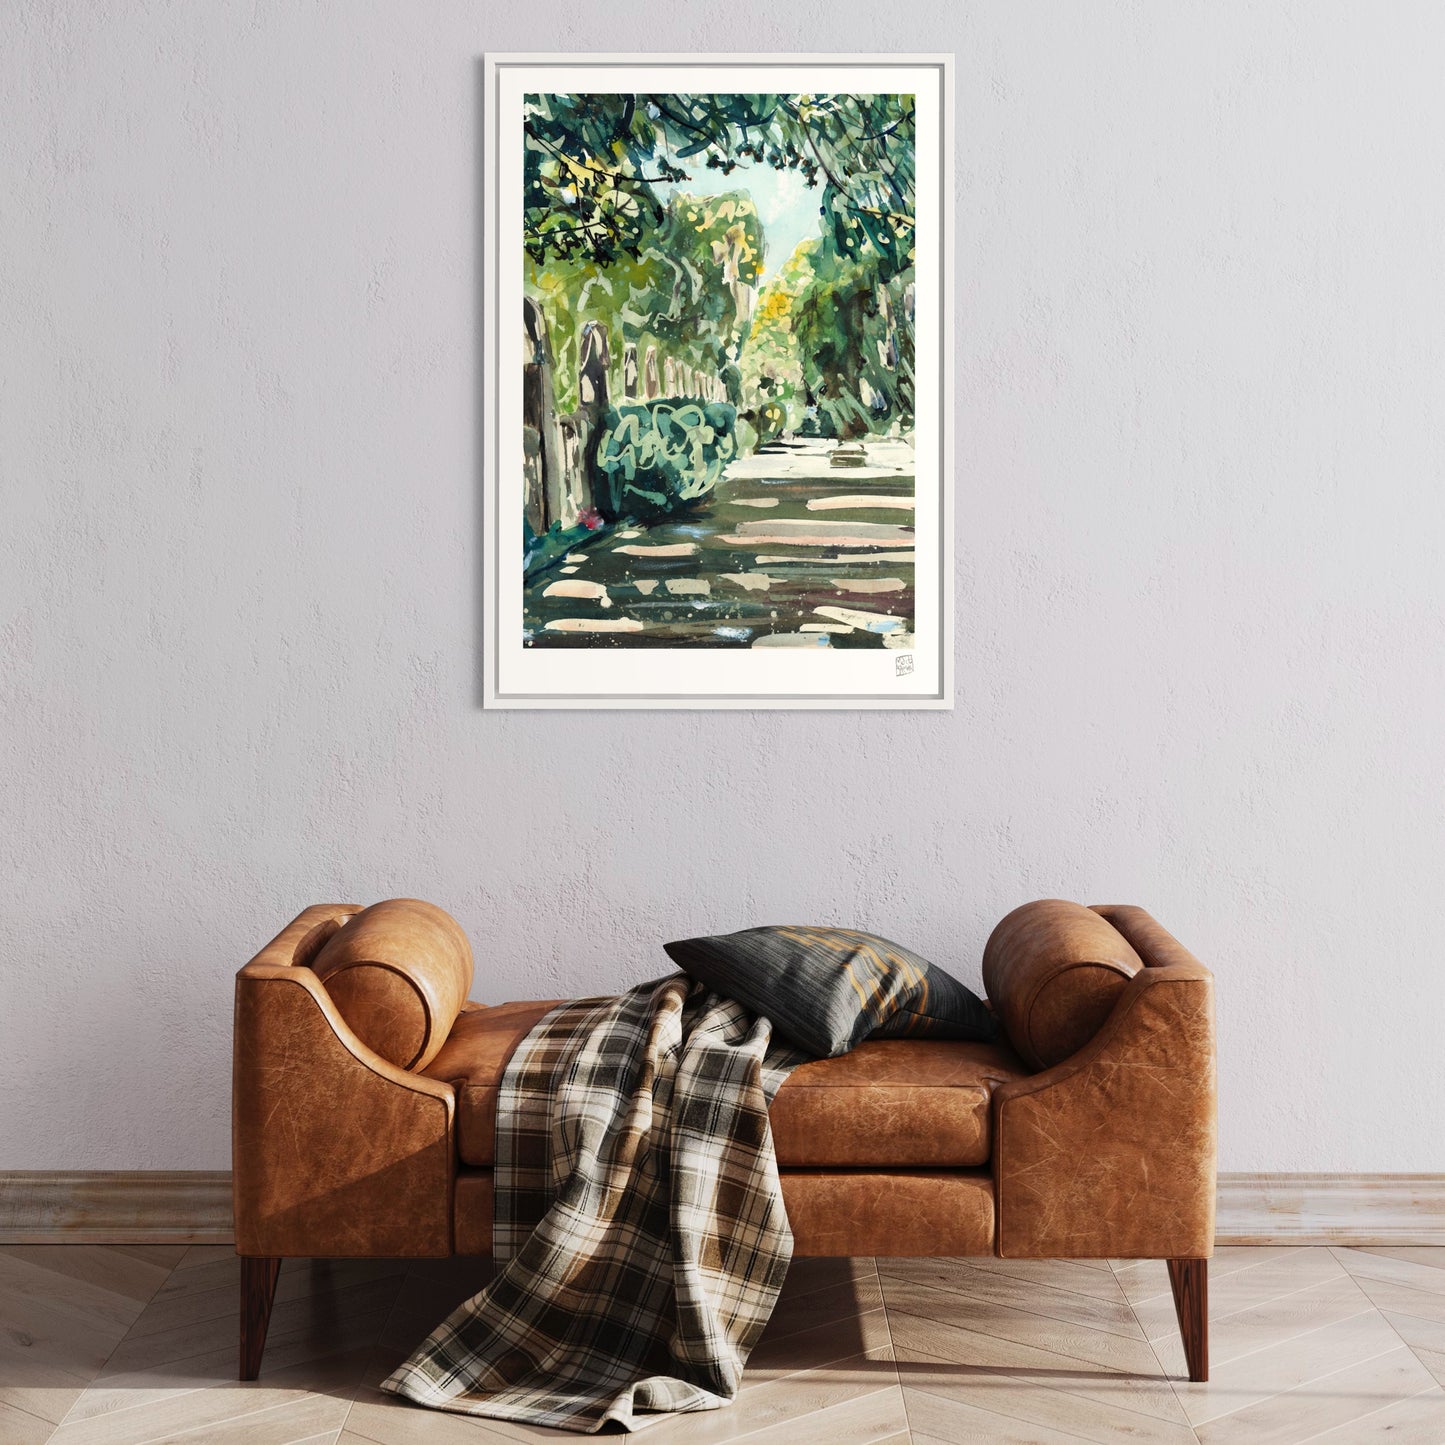 New A1 | A2 Limited Edition Print - Resting Place